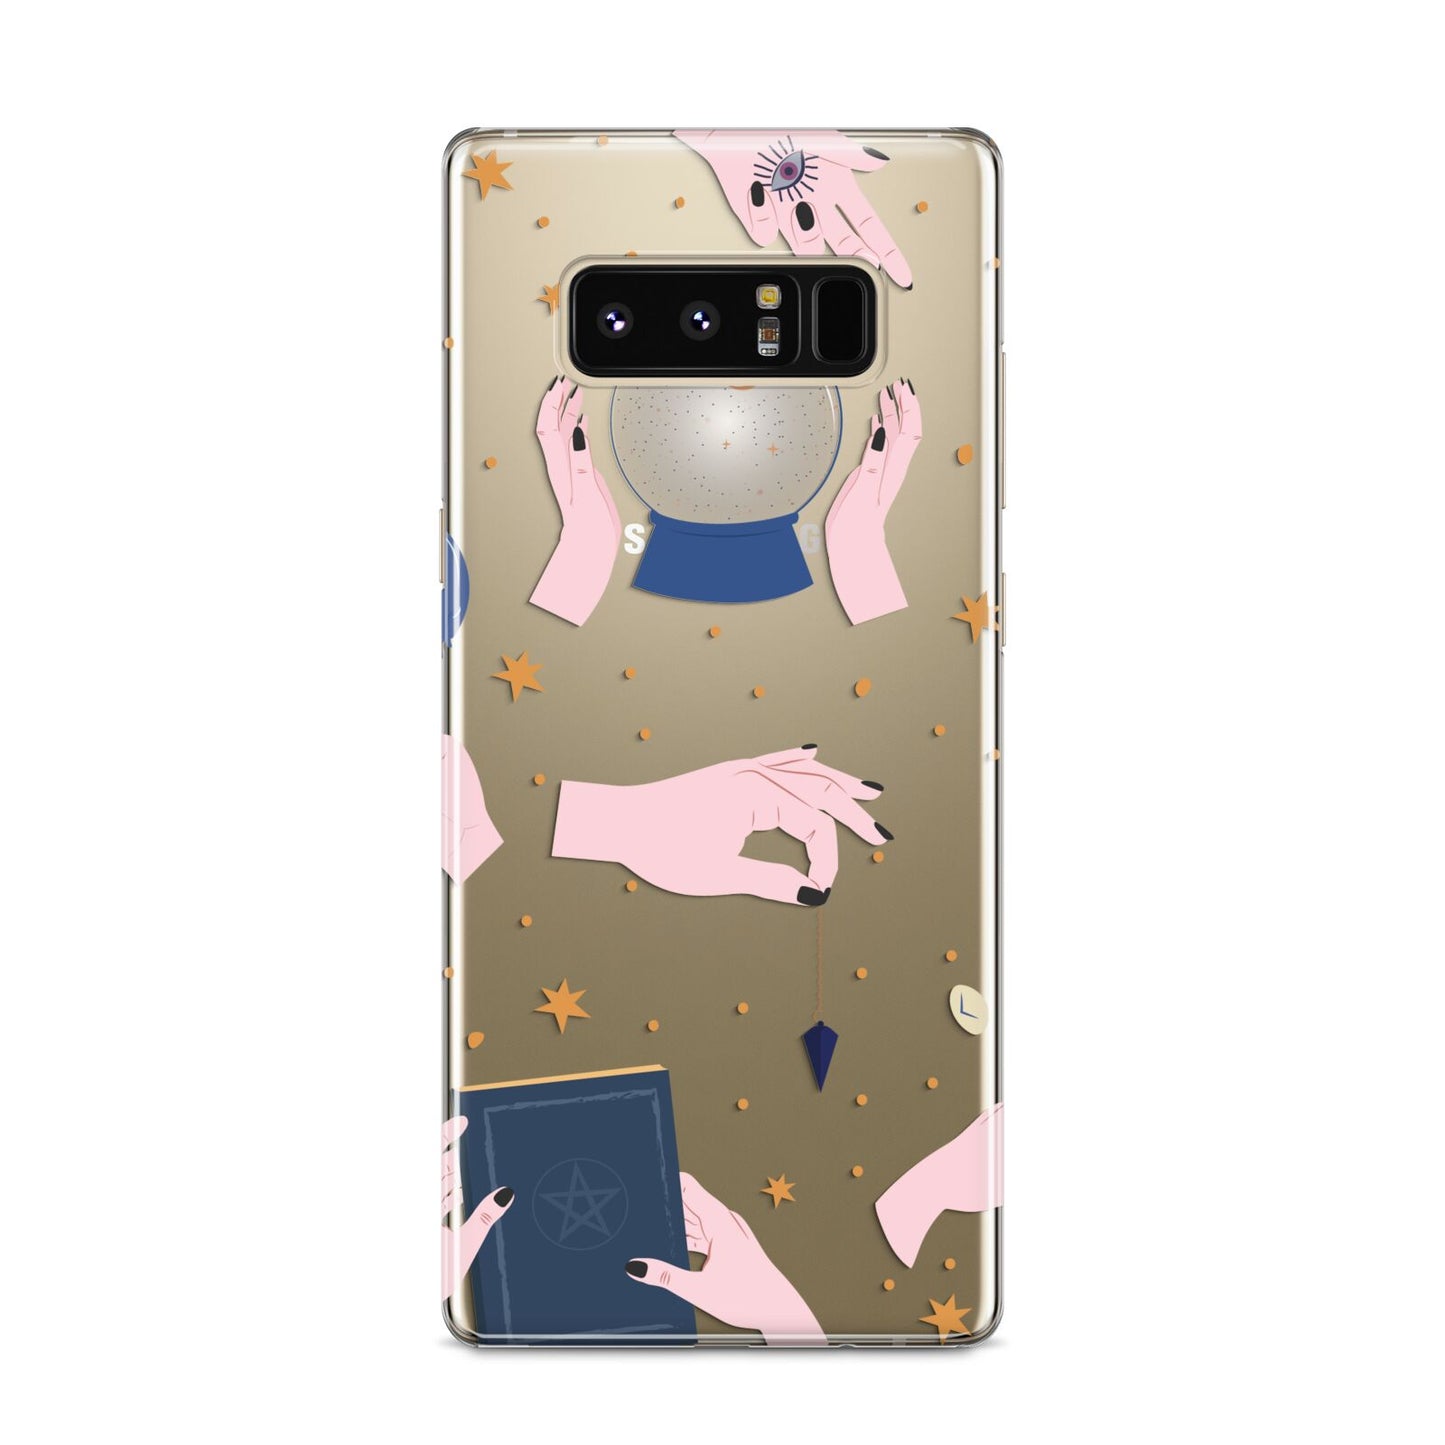 Clairvoyant Witches Hands Samsung Galaxy S8 Case